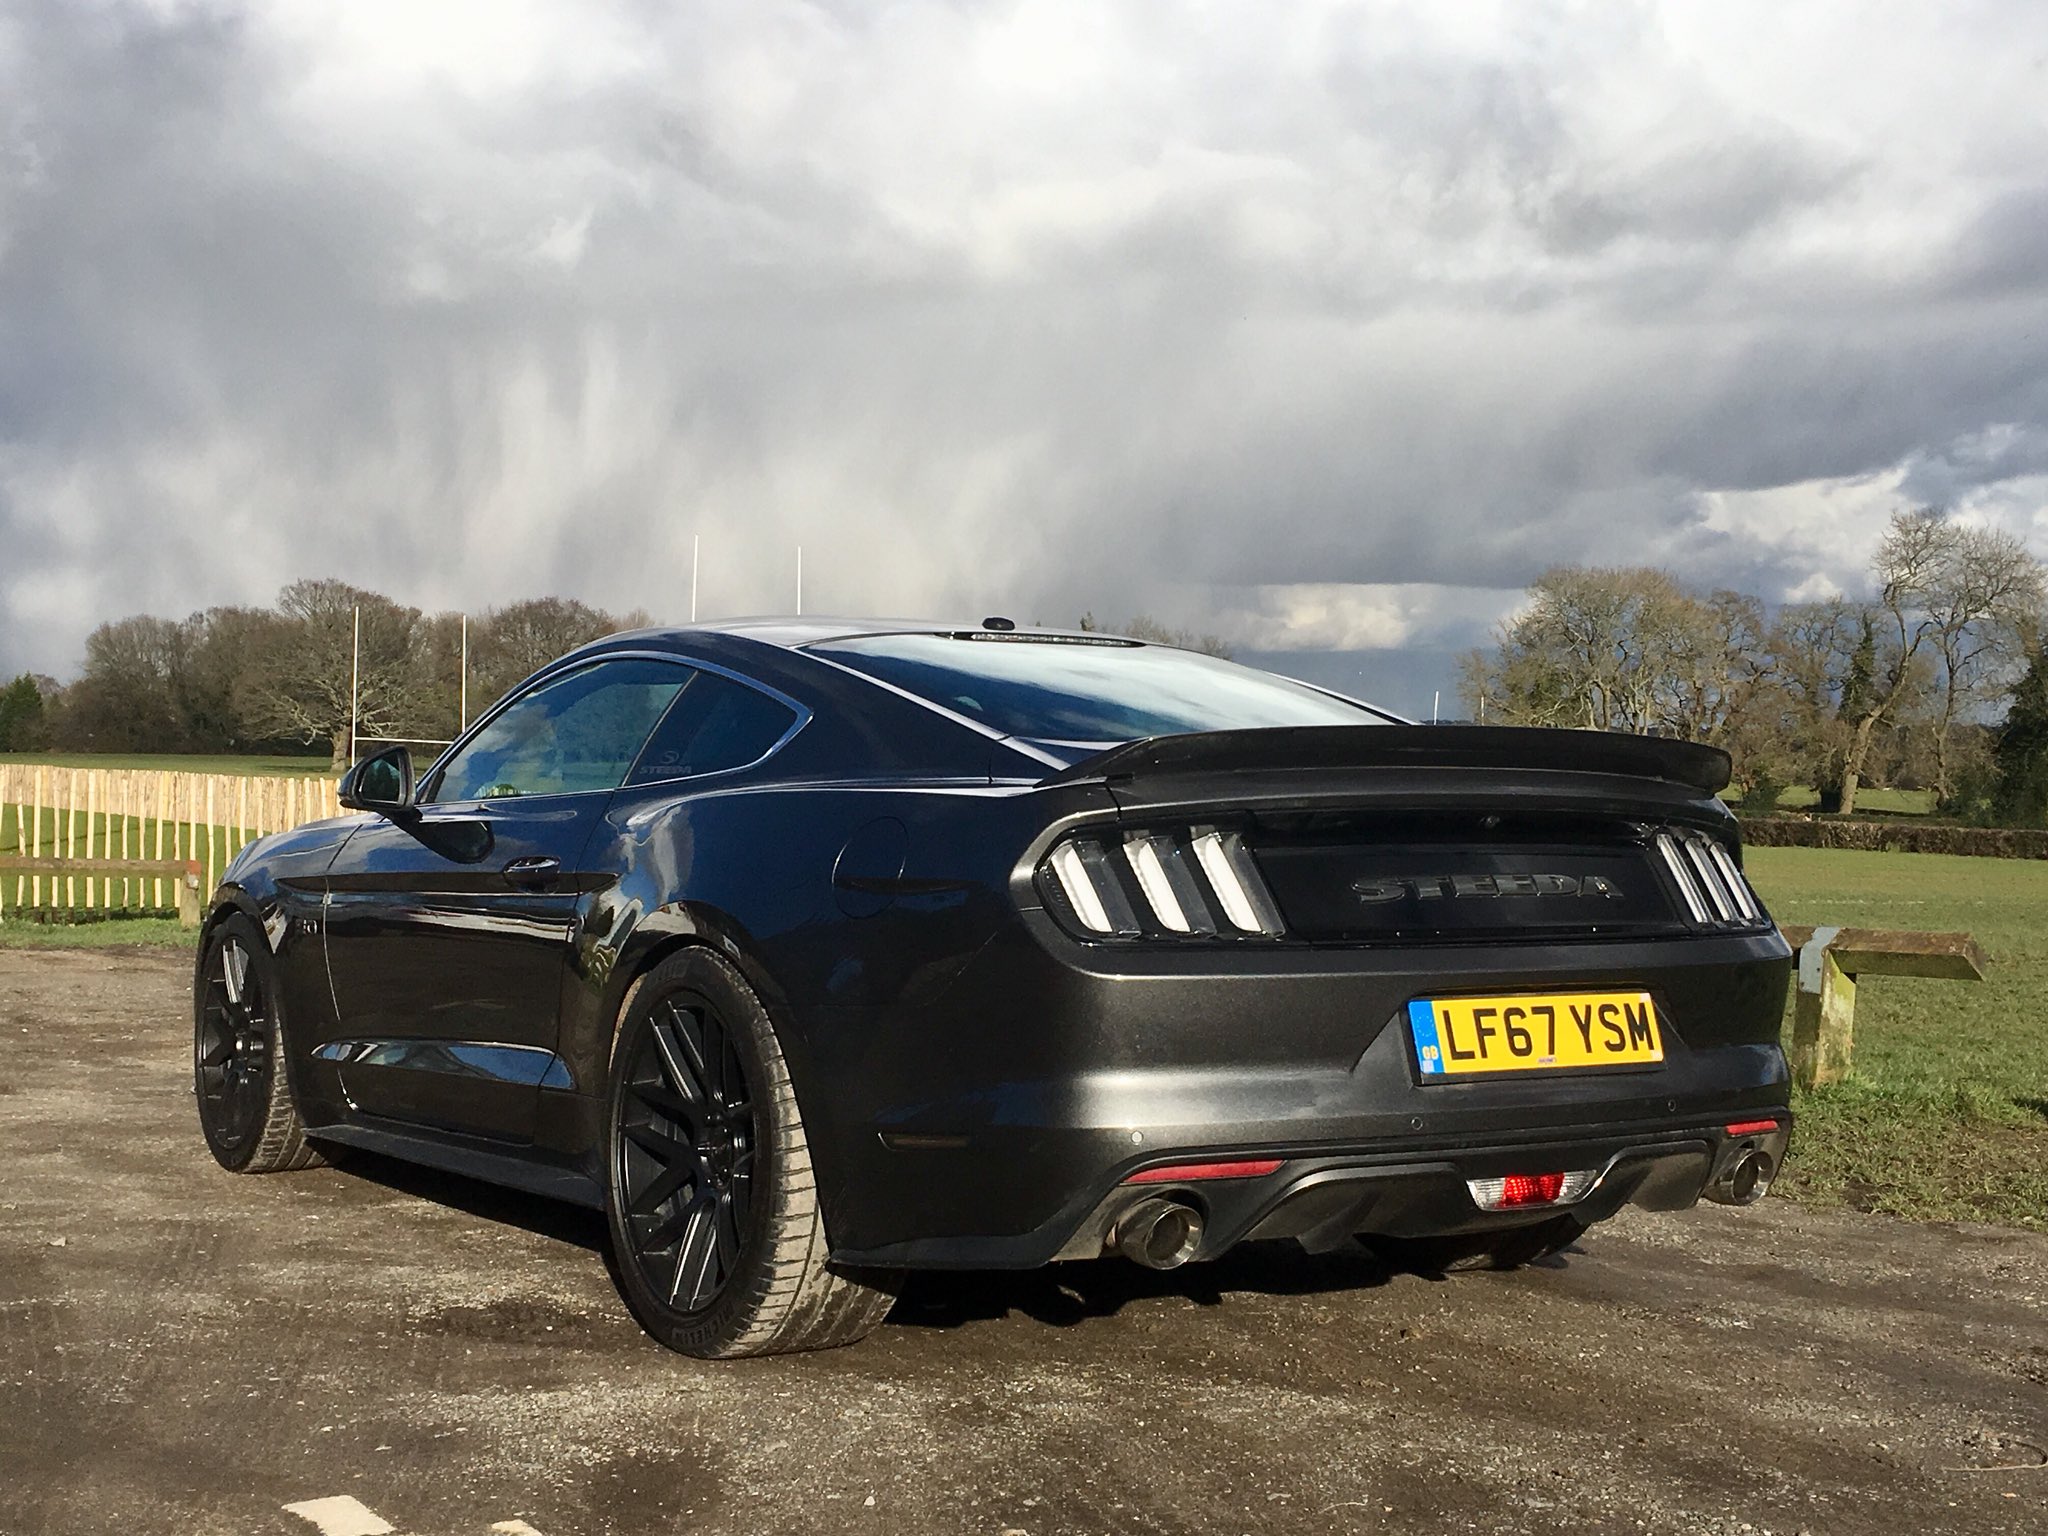 Tim Pitt on X: Steeda is already a big name in Mustang tuning